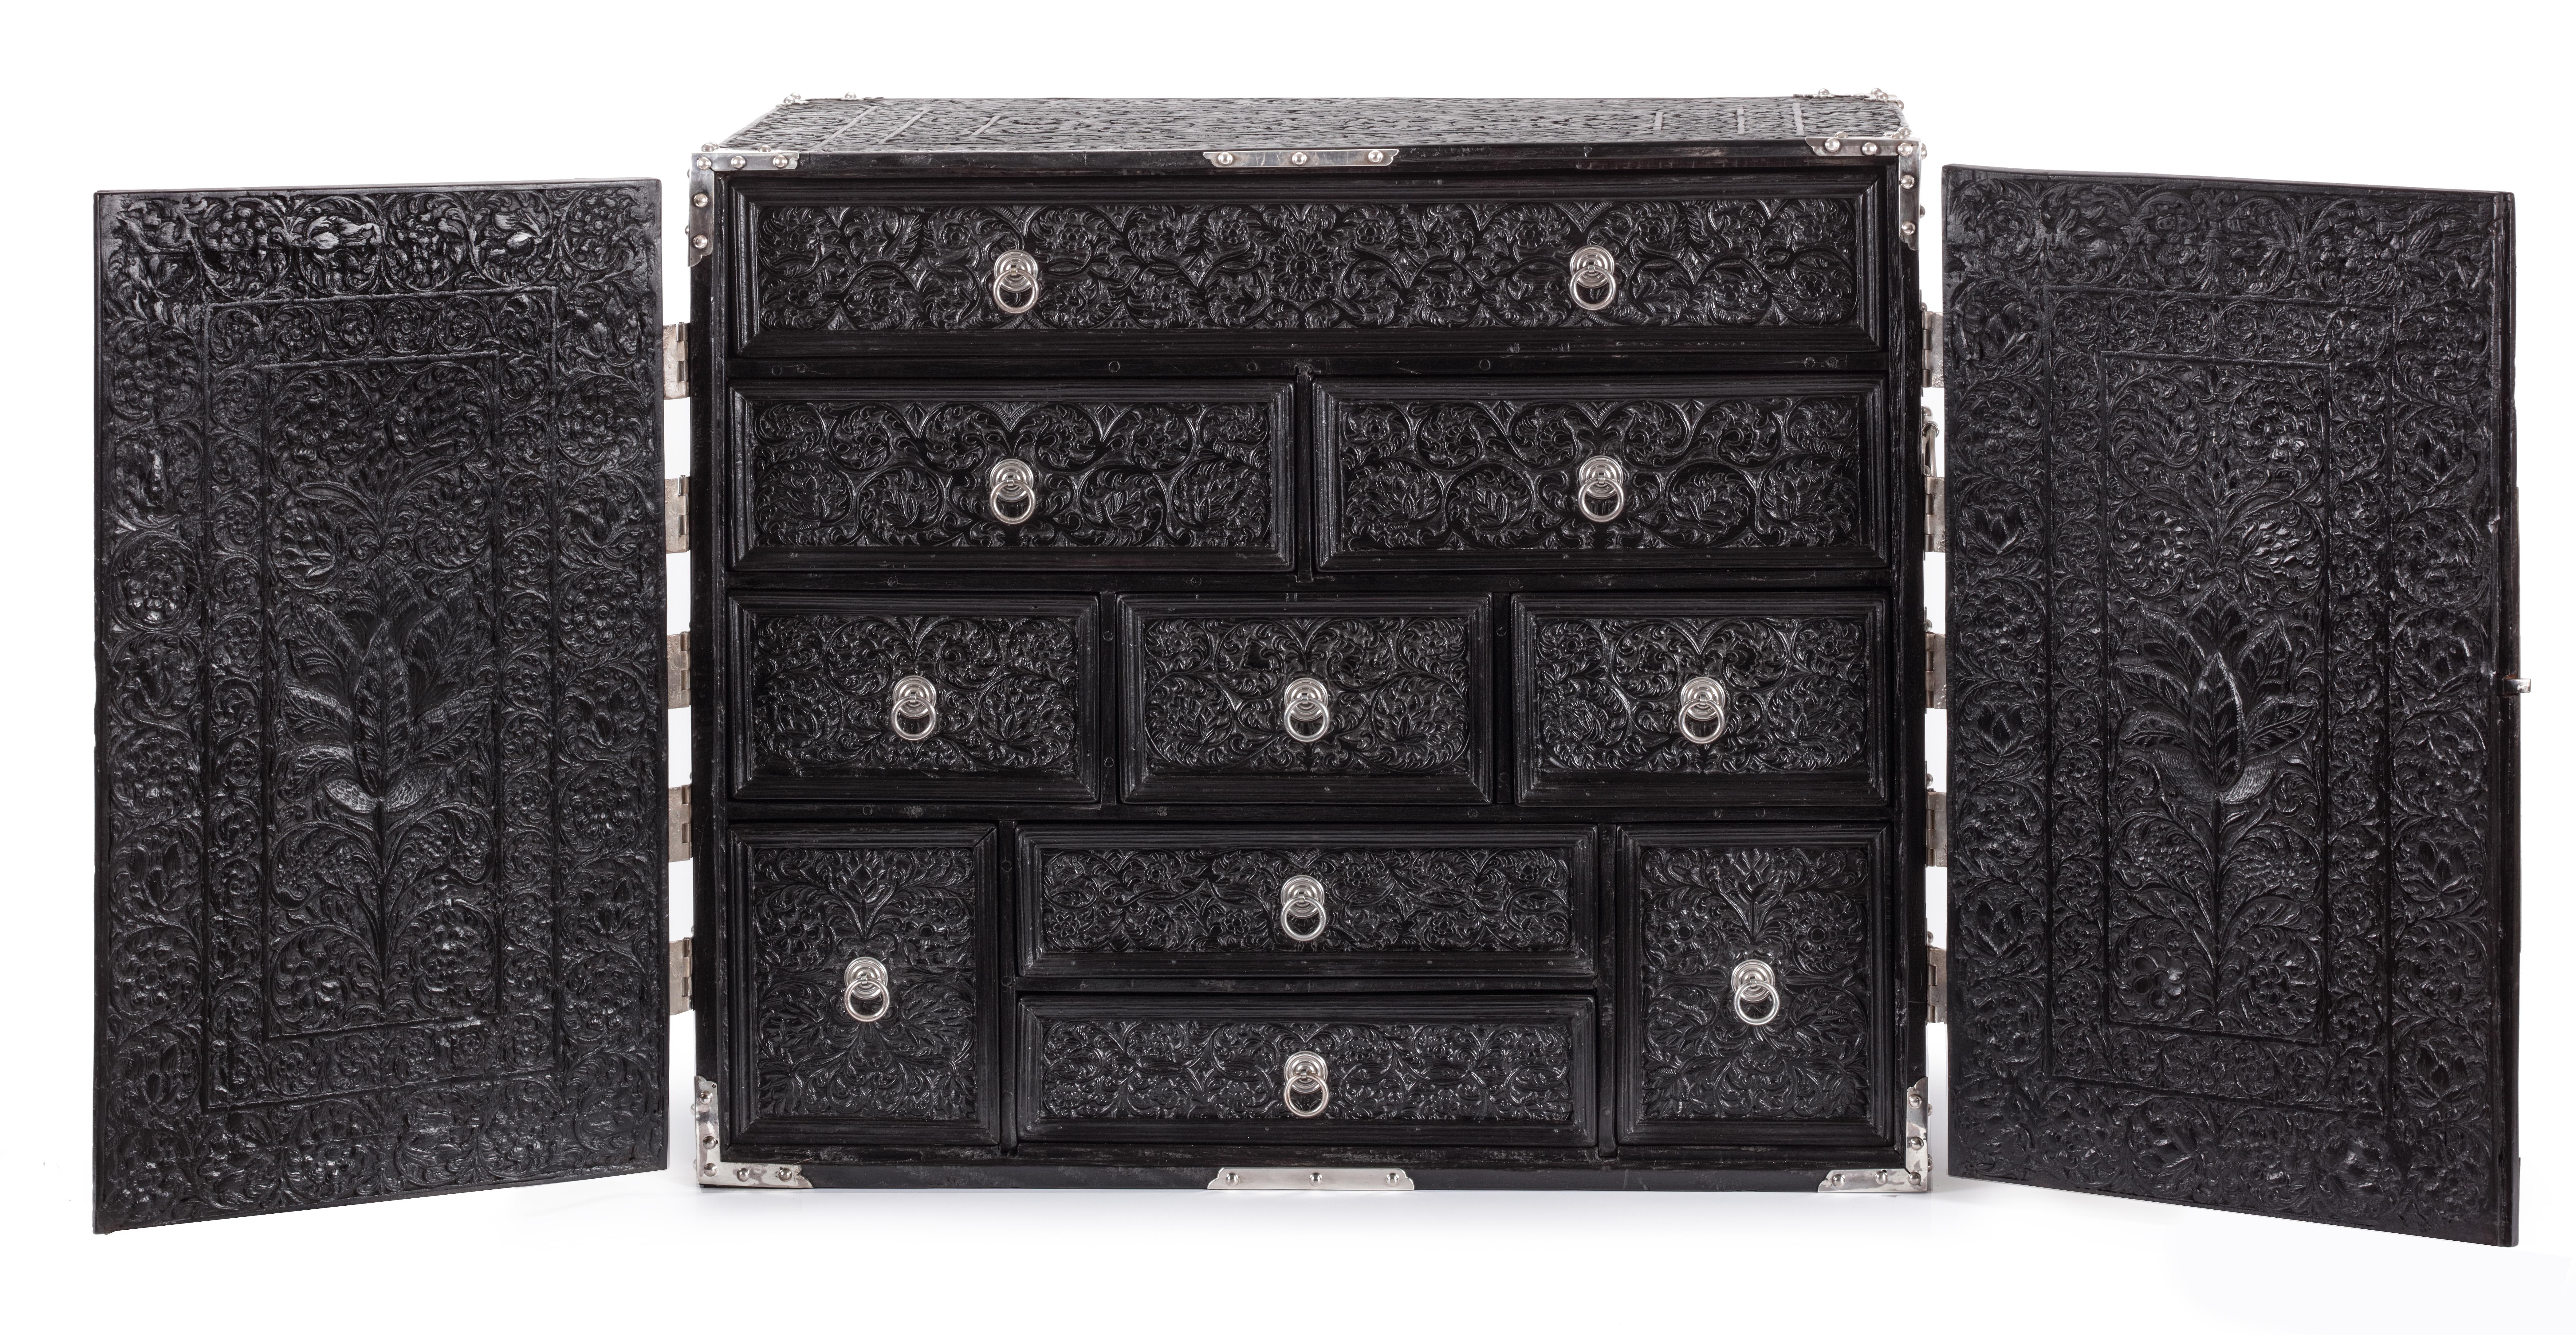 Dutch Colonial A 17th century Dutch-colonial ebony two-door VOC cabinet with silver mounts For Sale